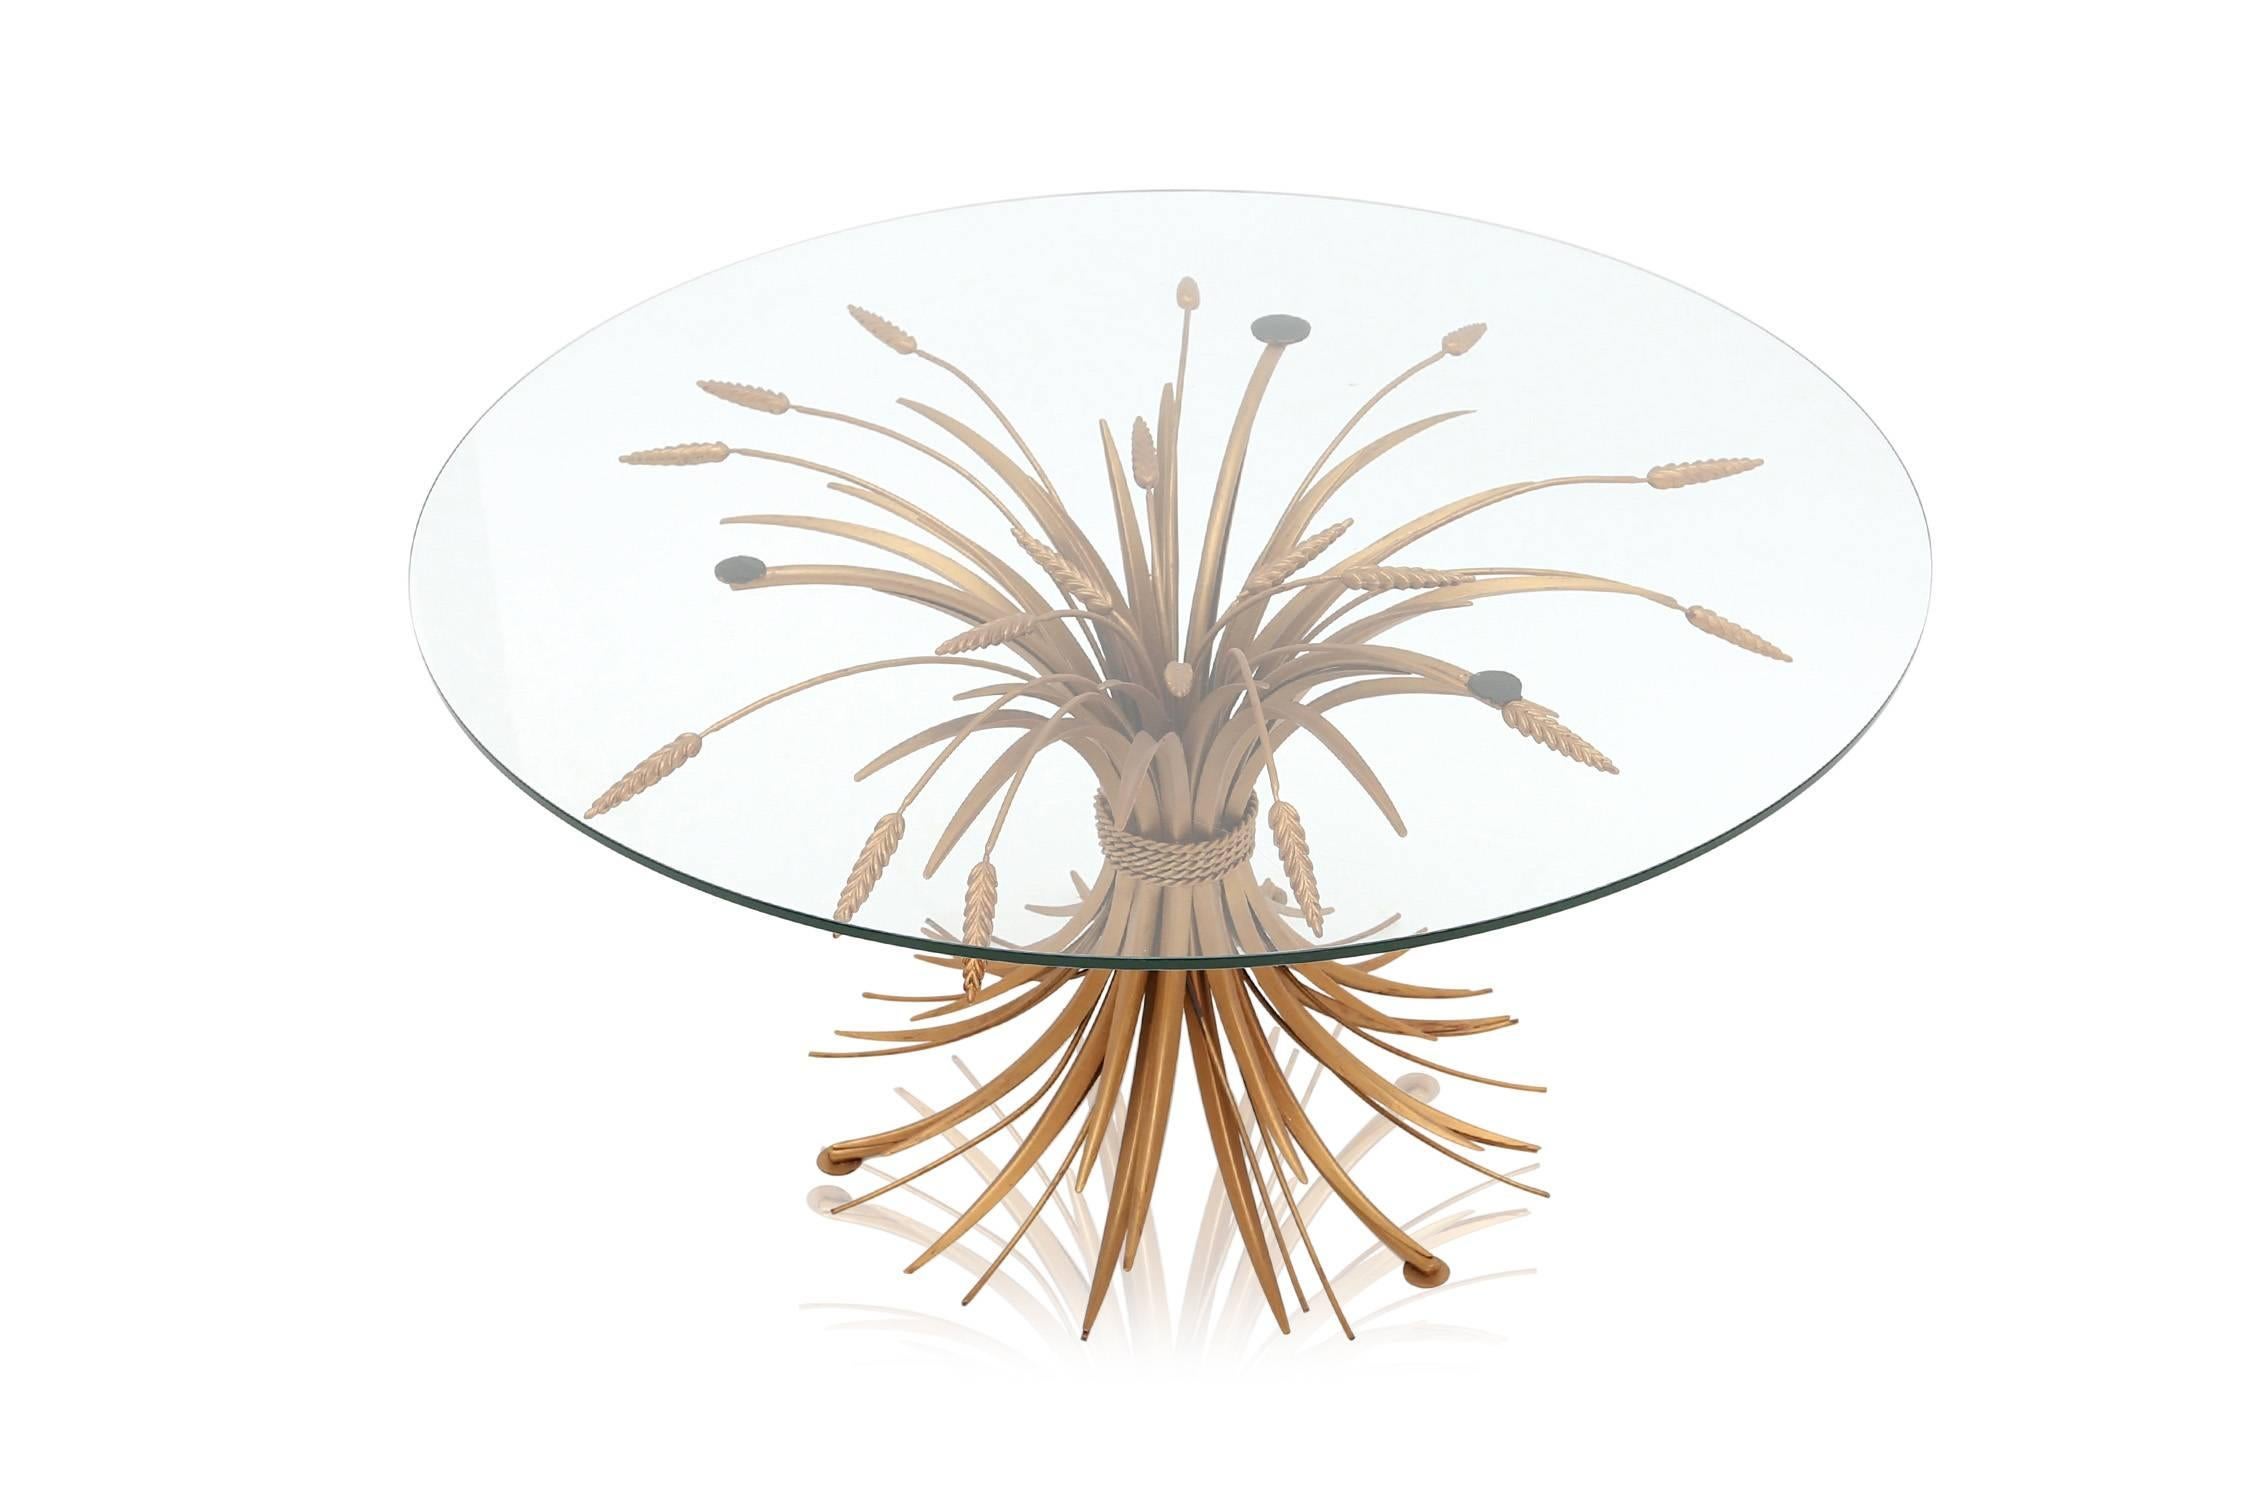 Brass wheat sheaf cocktail table.

Coco chanel had a similar table in her living room.

France, 1960s, Mid-Century Hollywood Regency.

Ø 90 cm H 40 cm.